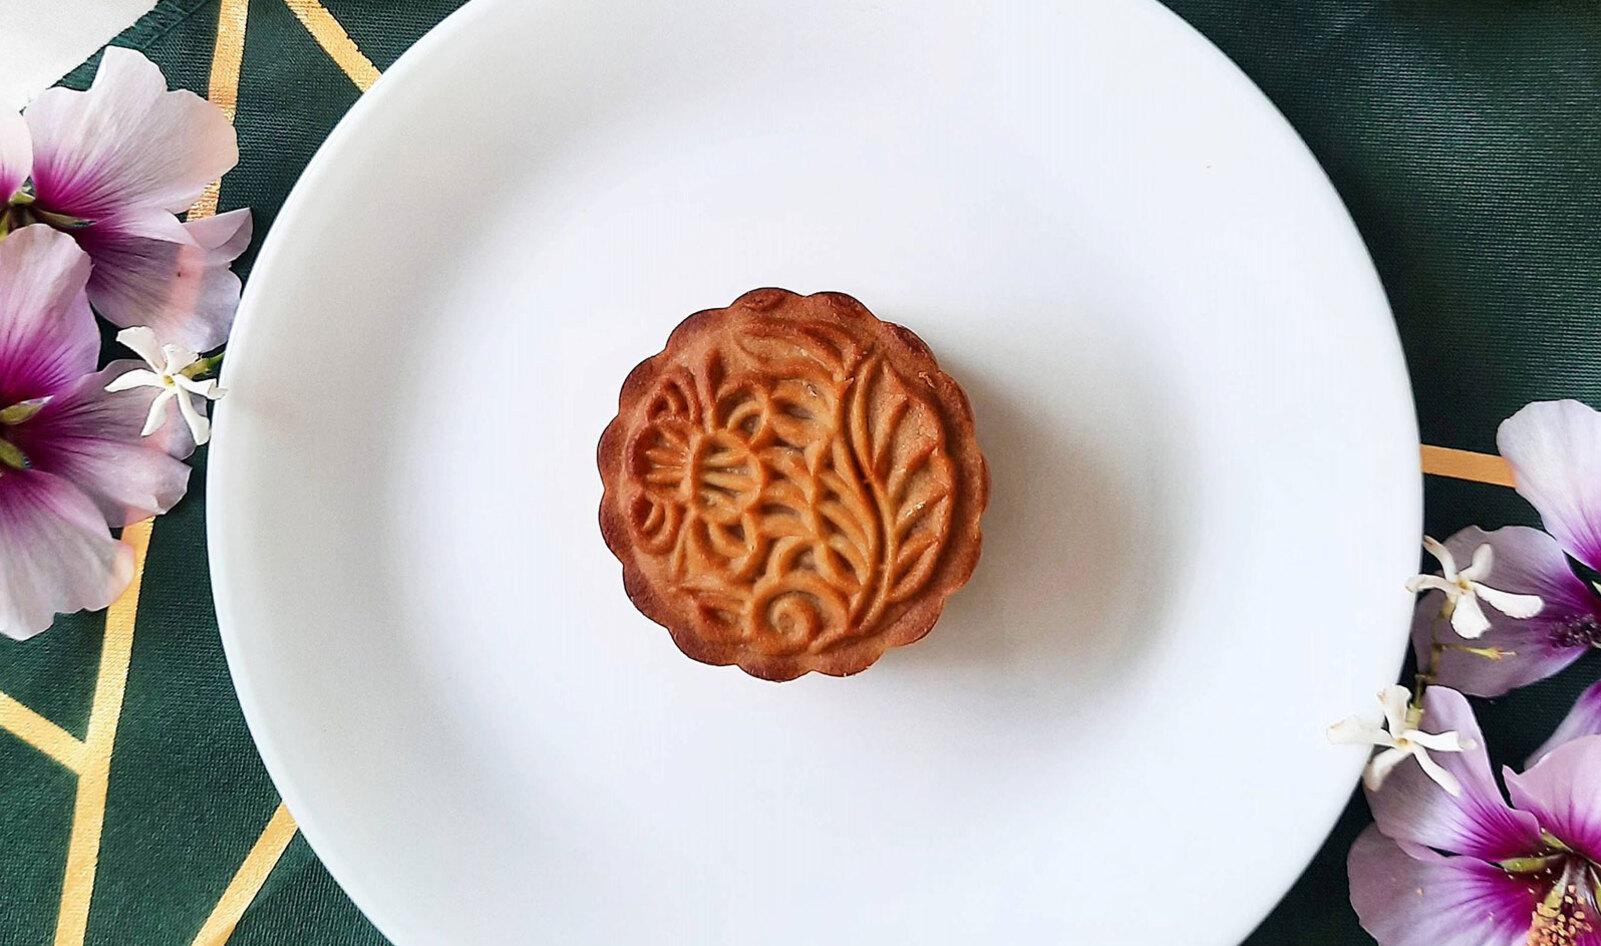 Traditional Mooncakes Go Vegan Thanks to This Bakery's Untraditional Egg